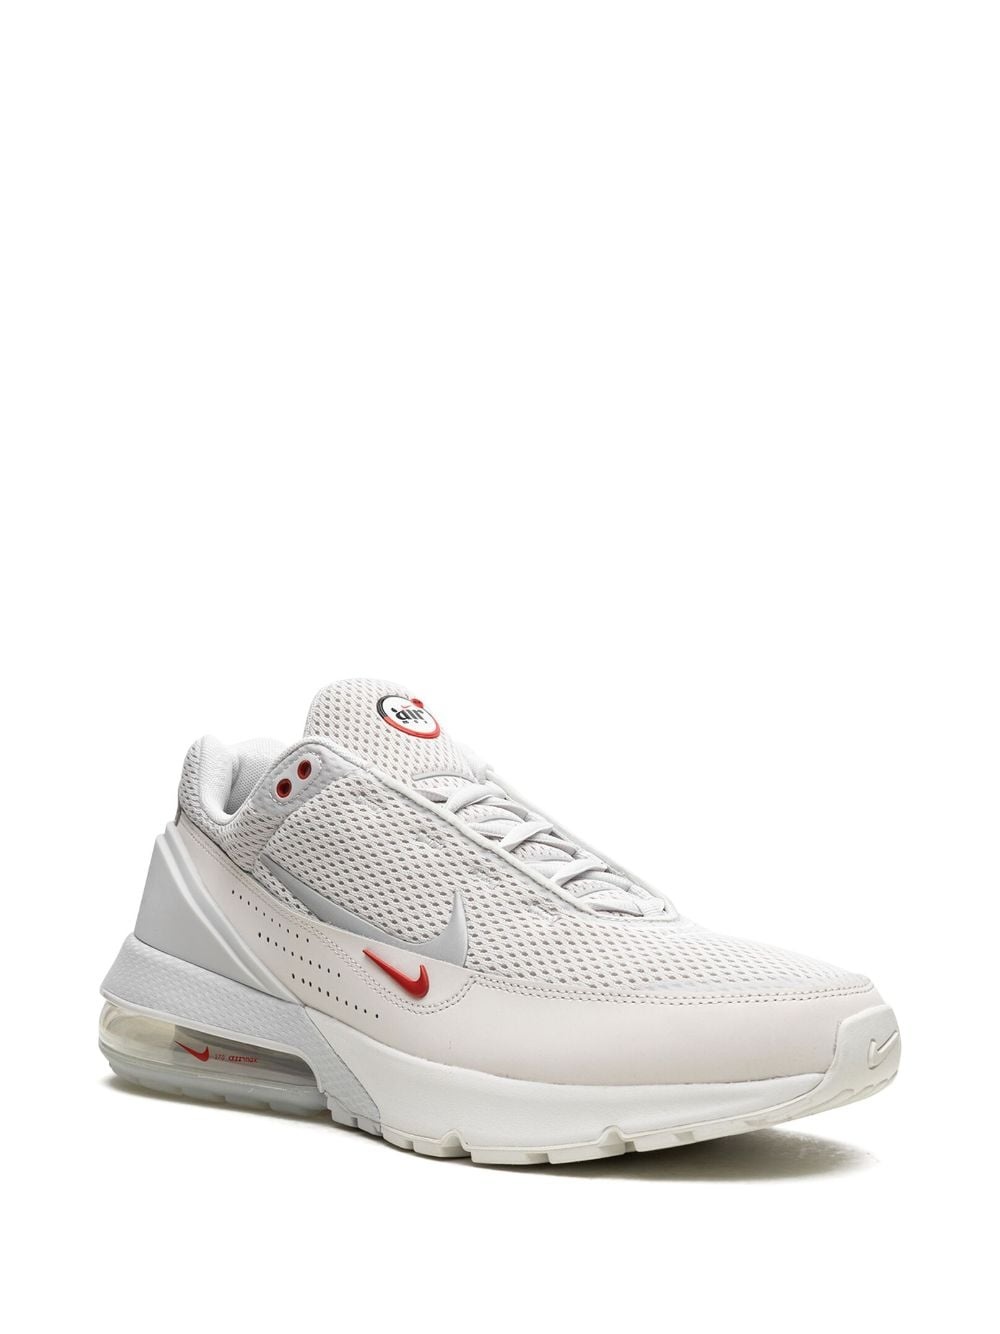 Air Max Pulse "Photon Dust" sneakers - 2